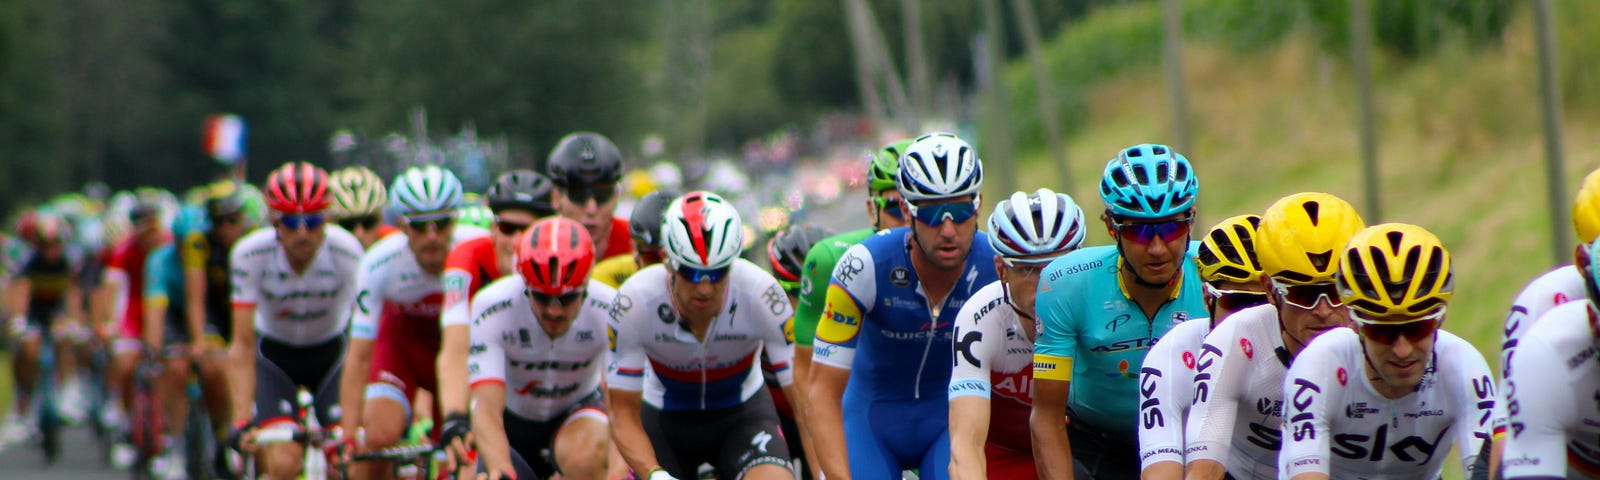 The peleton, a large cadence of bikers, at the Tour de France